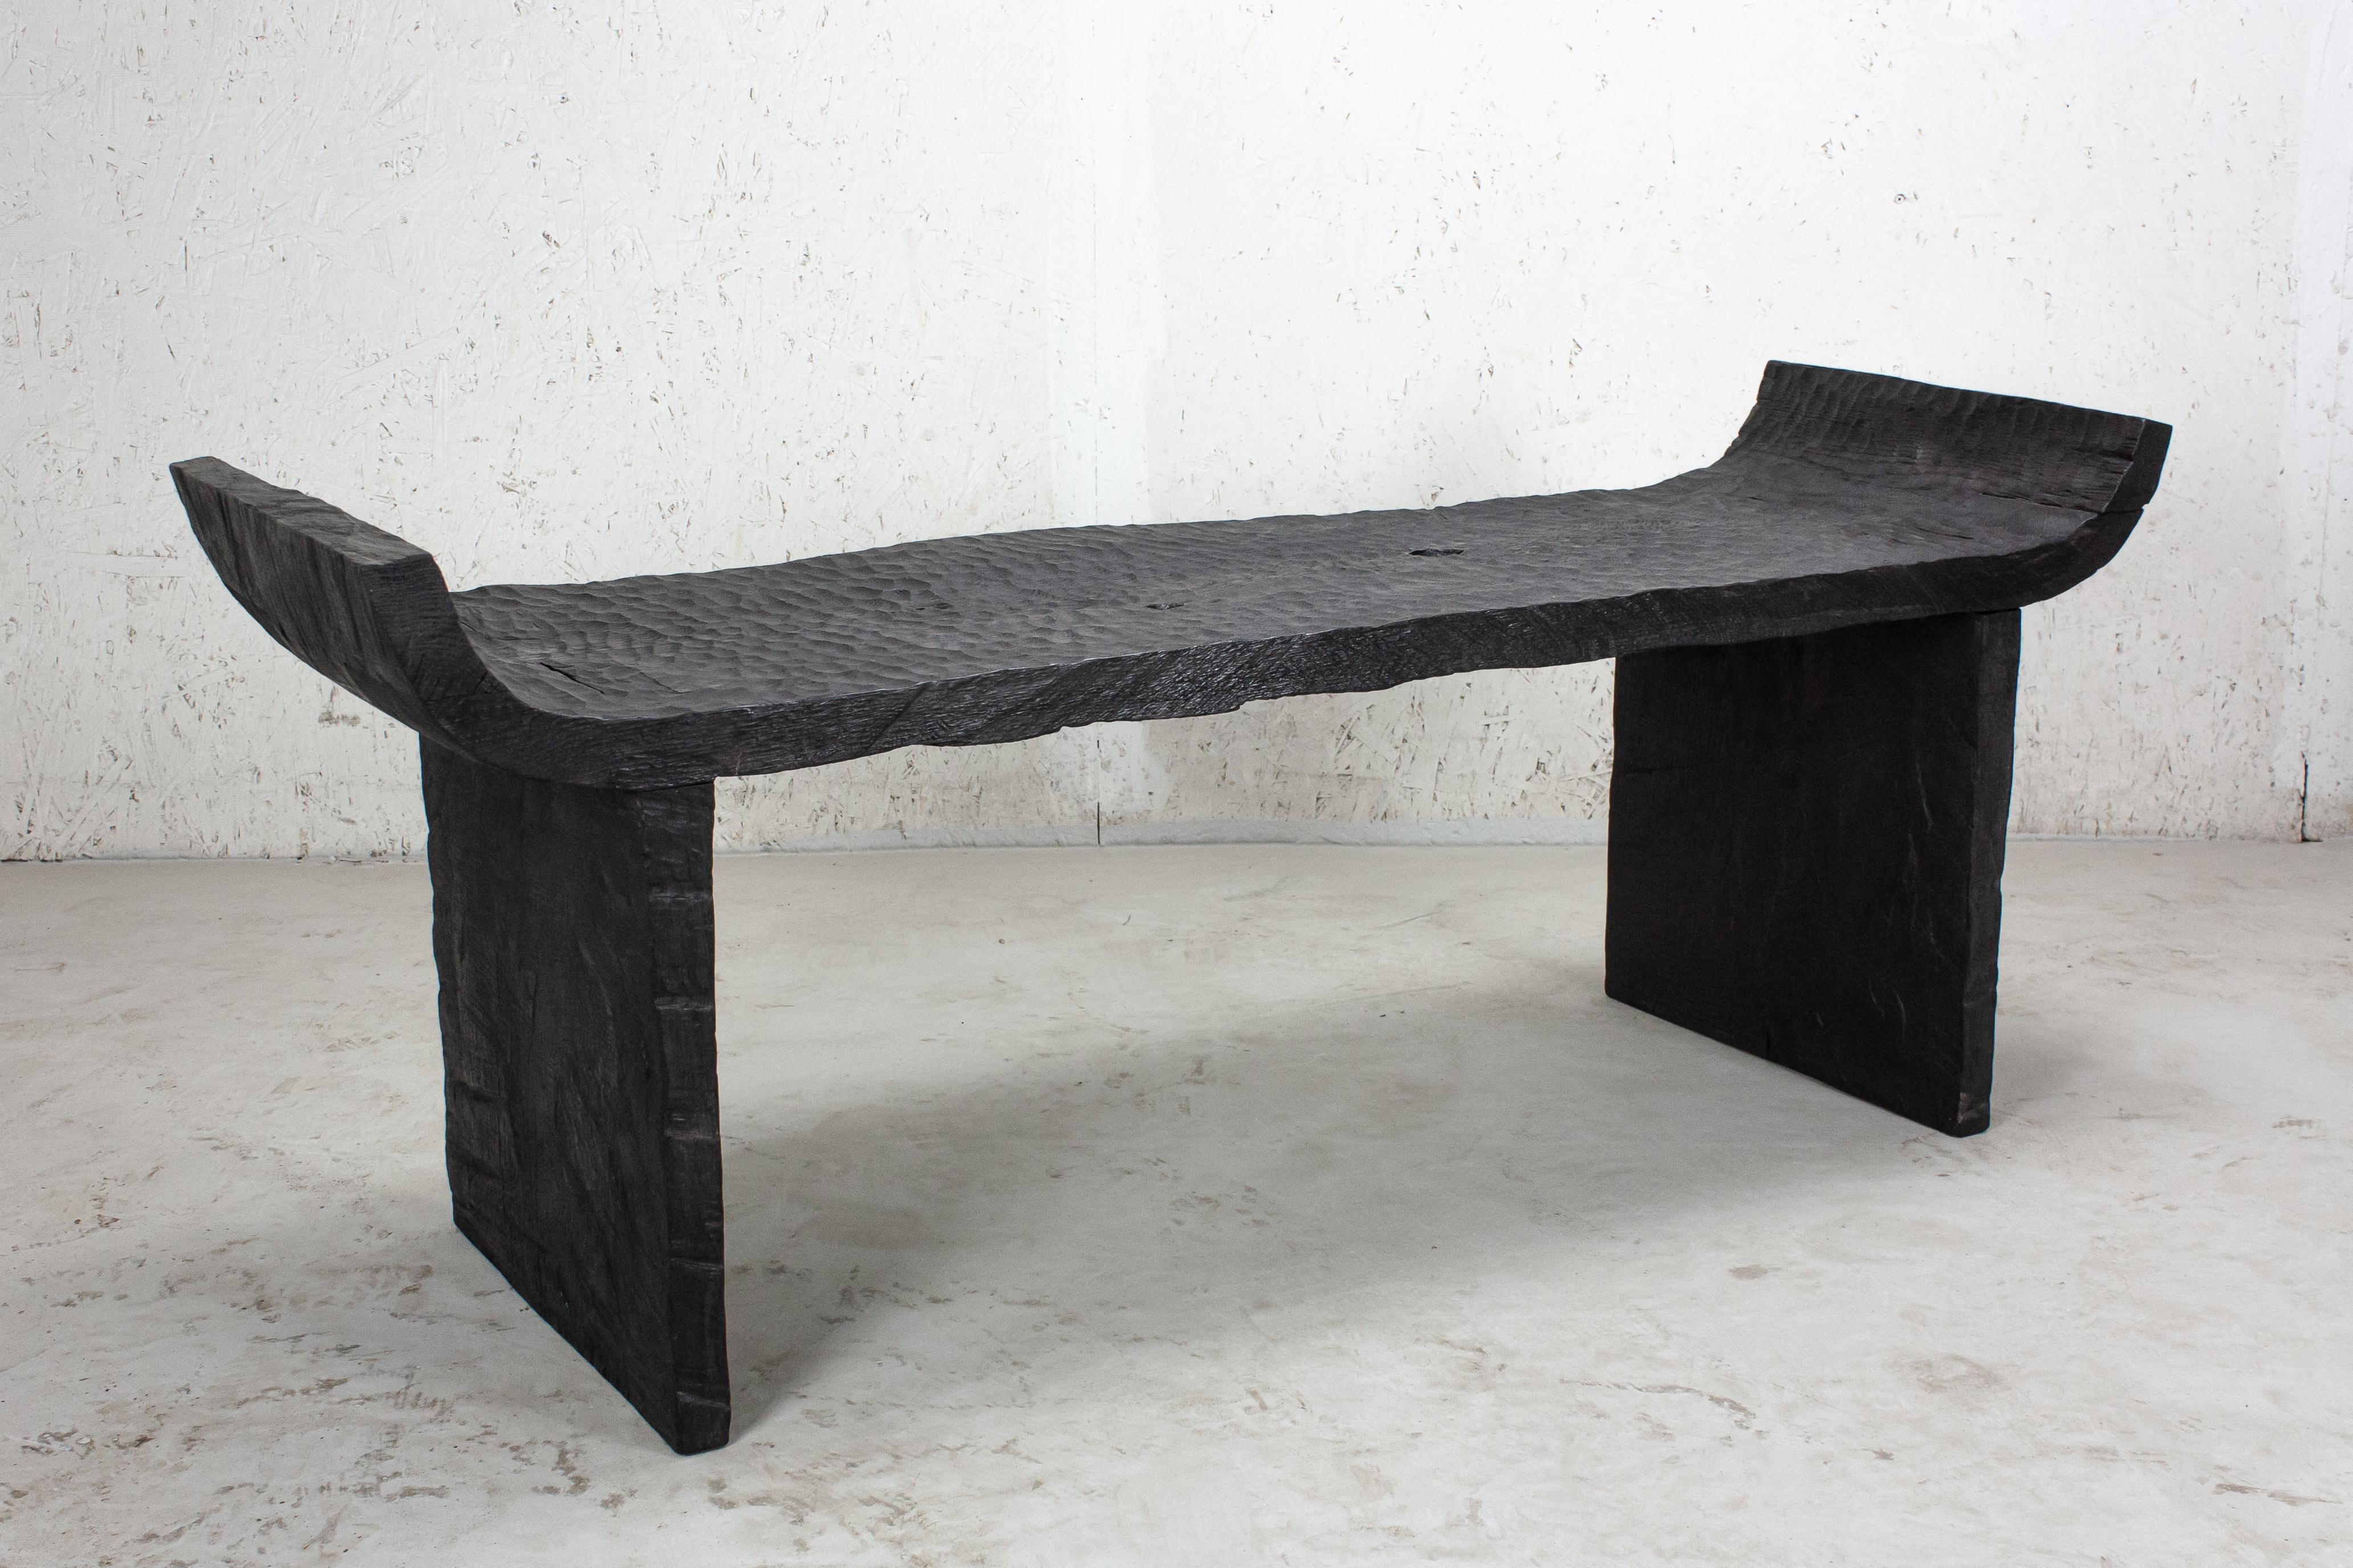 Bench
Sculpted wood (solid oak)
Finish: hammered, dark

[Suitable for outdoor use]

SÓHA design studio conceives and produces furniture design and decorative objects in solid oak in an authentic style. Inspiration to create all these items comes